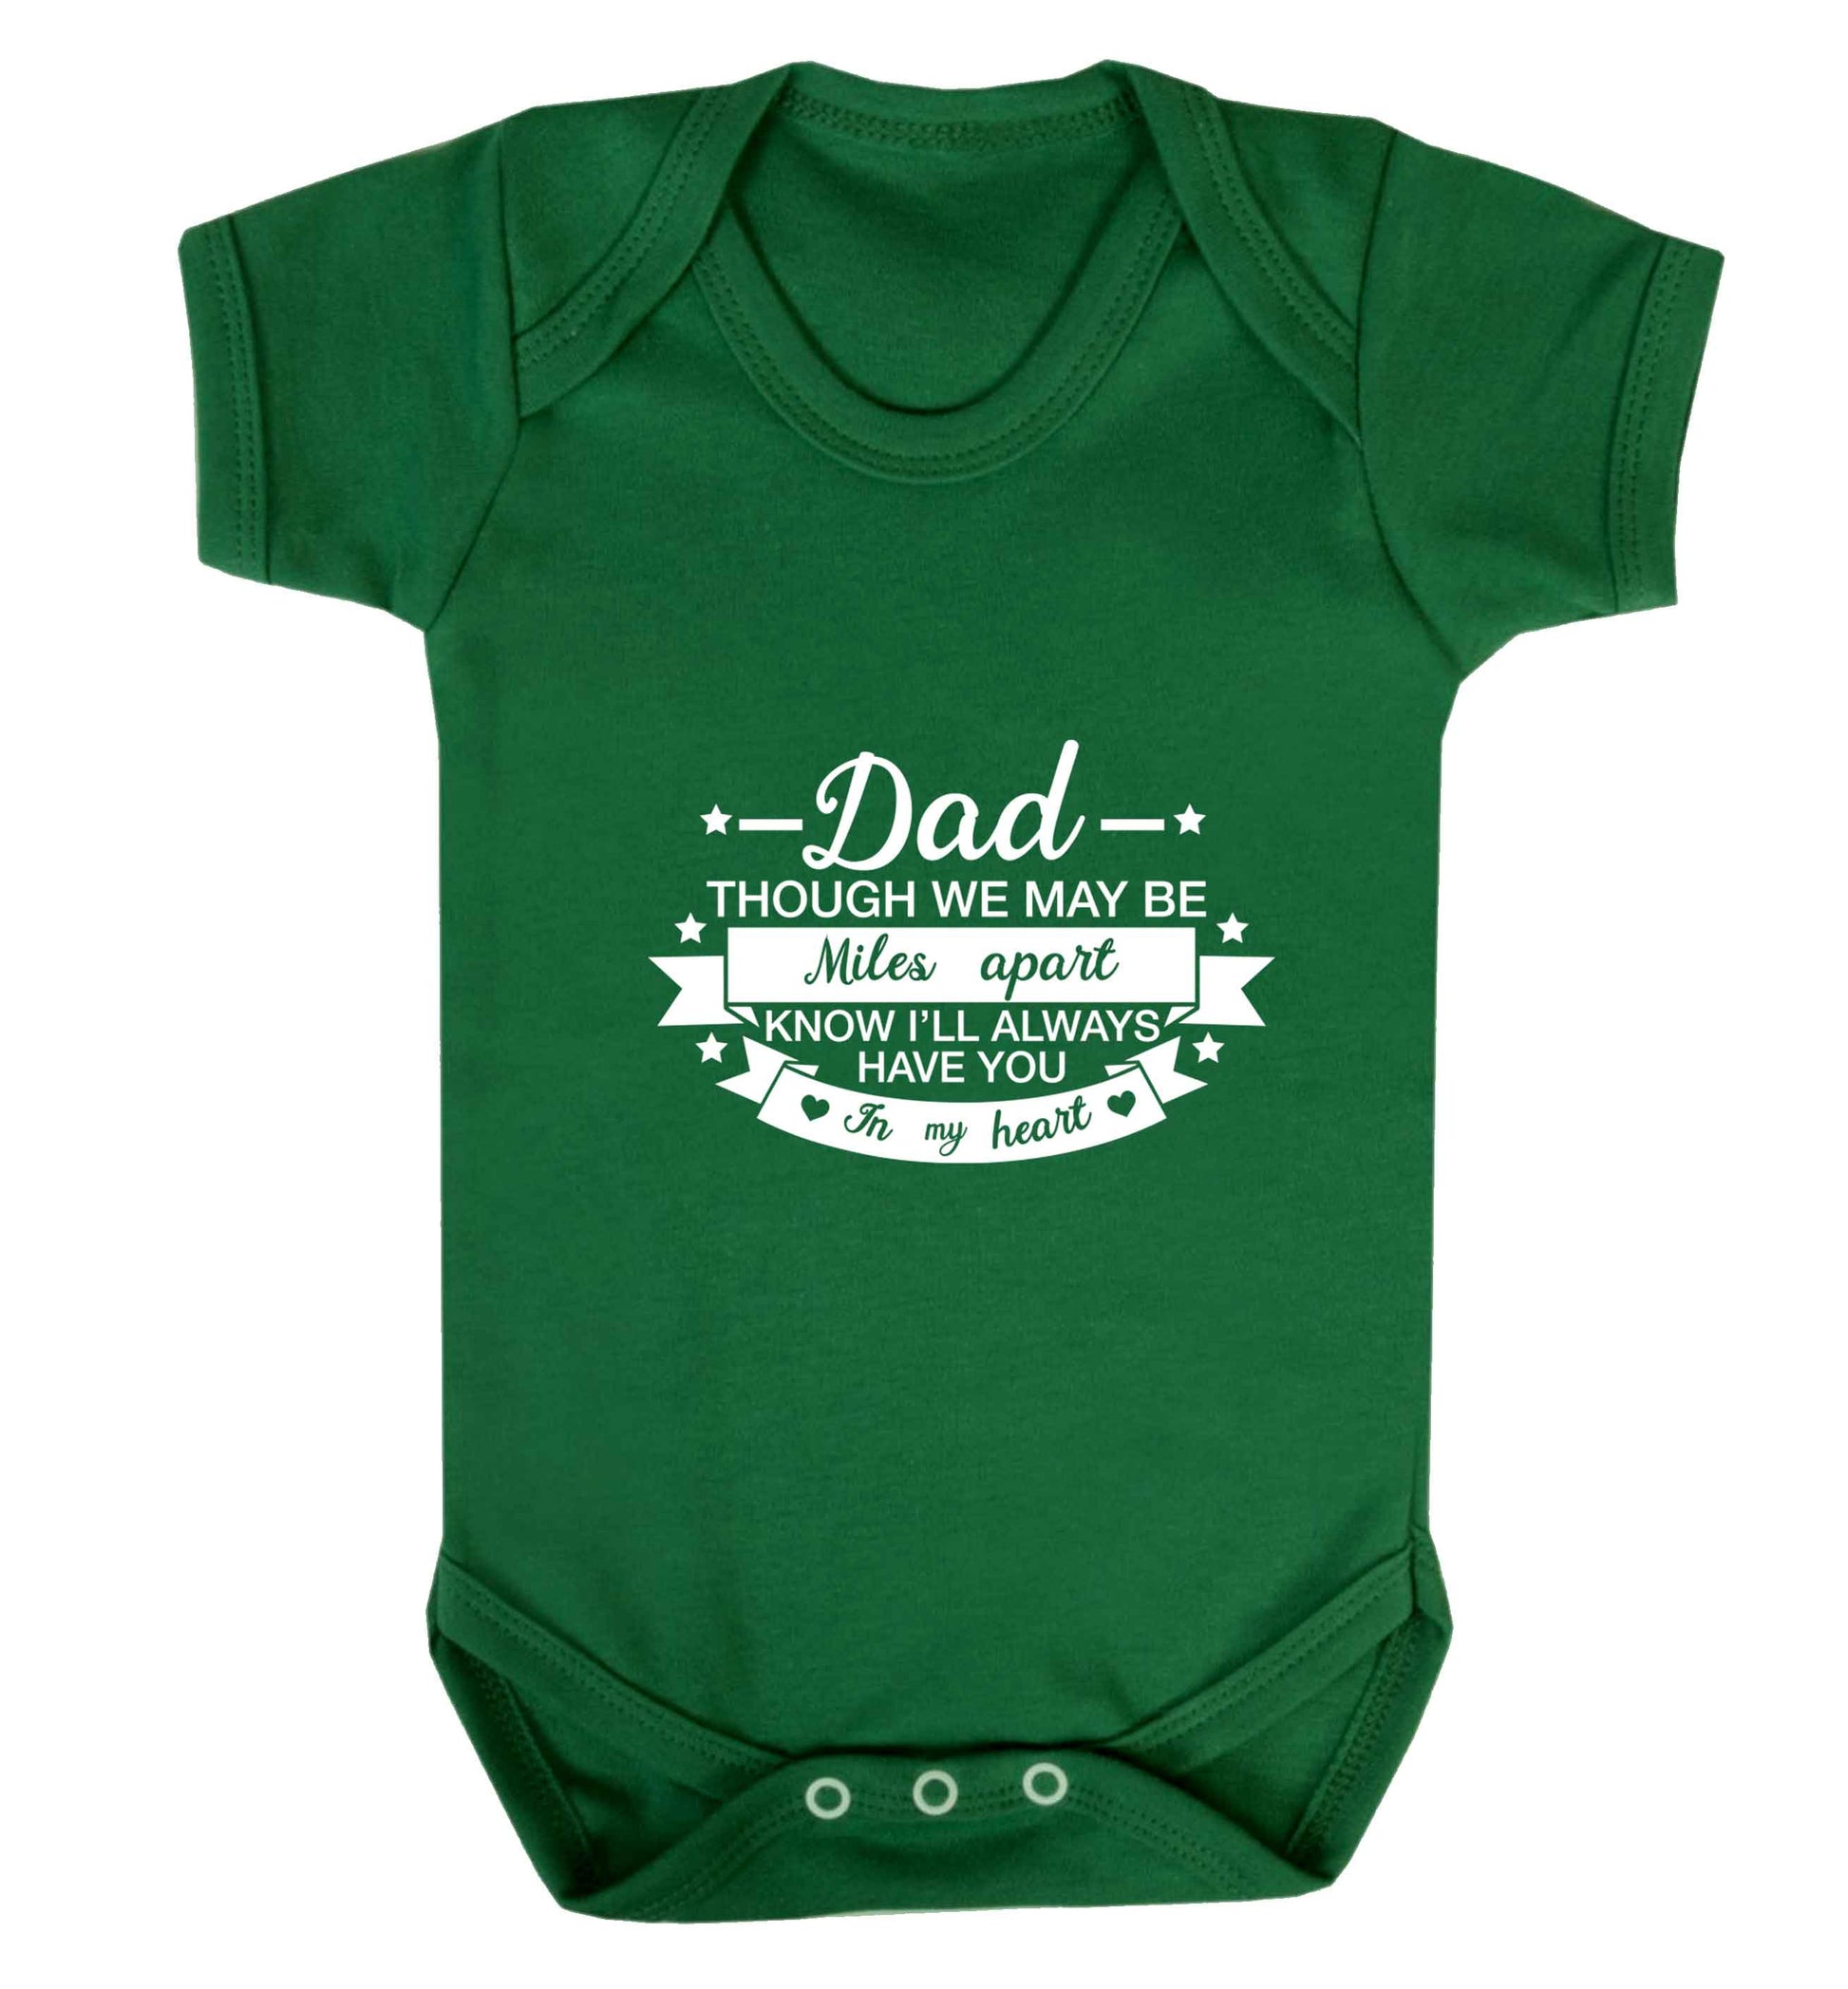 Dad though we are miles apart know I'll always have you in my heart baby vest green 18-24 months